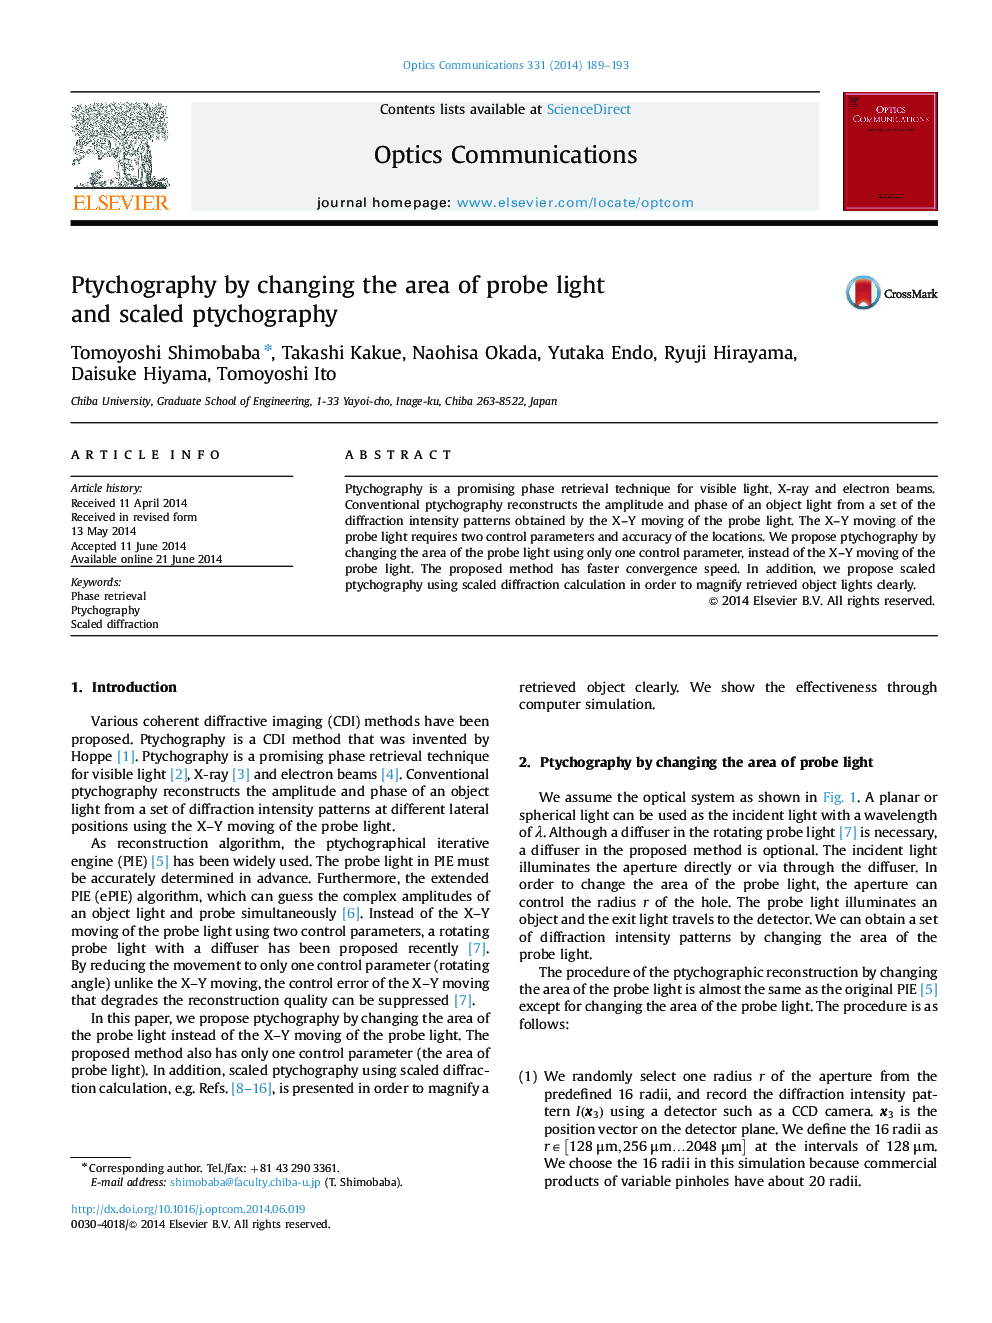 Ptychography by changing the area of probe light and scaled ptychography